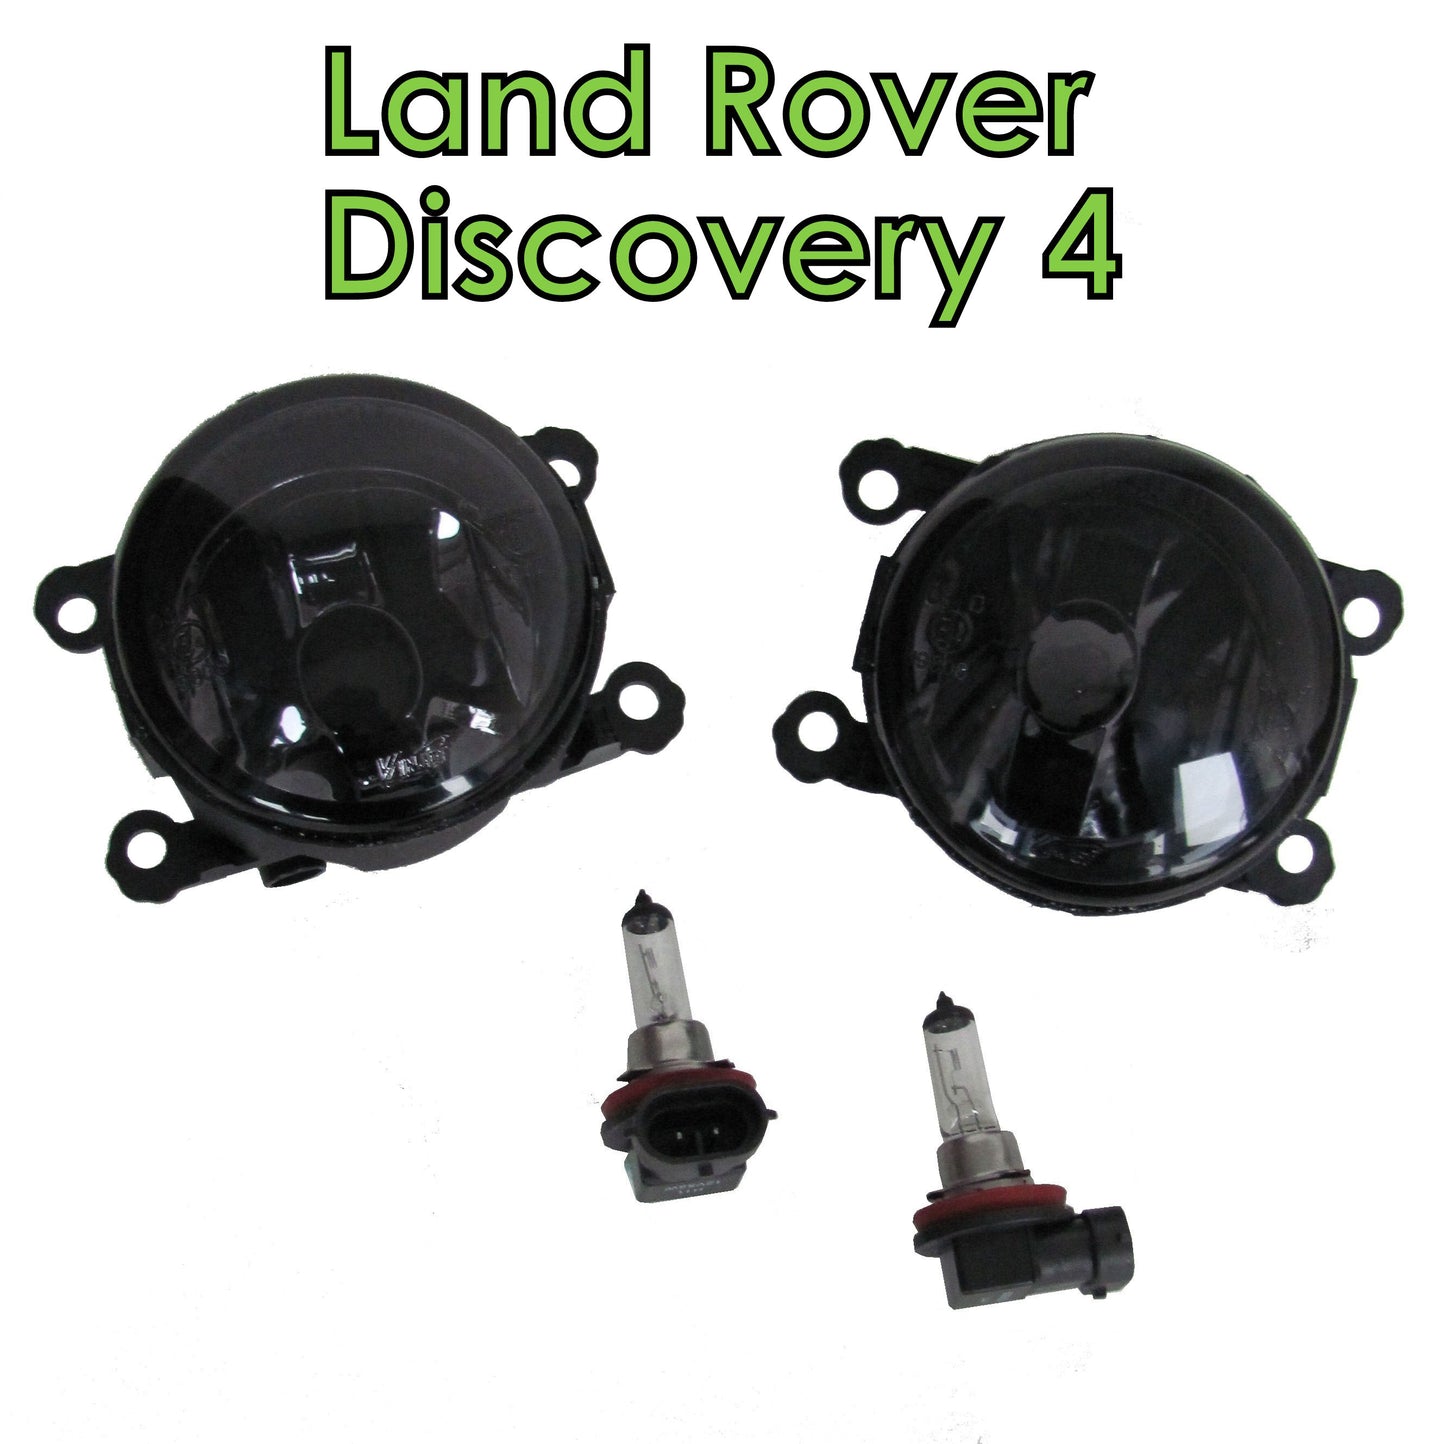 Front Bumper fog lamps - Smoked - for Land Rover Discovery 4